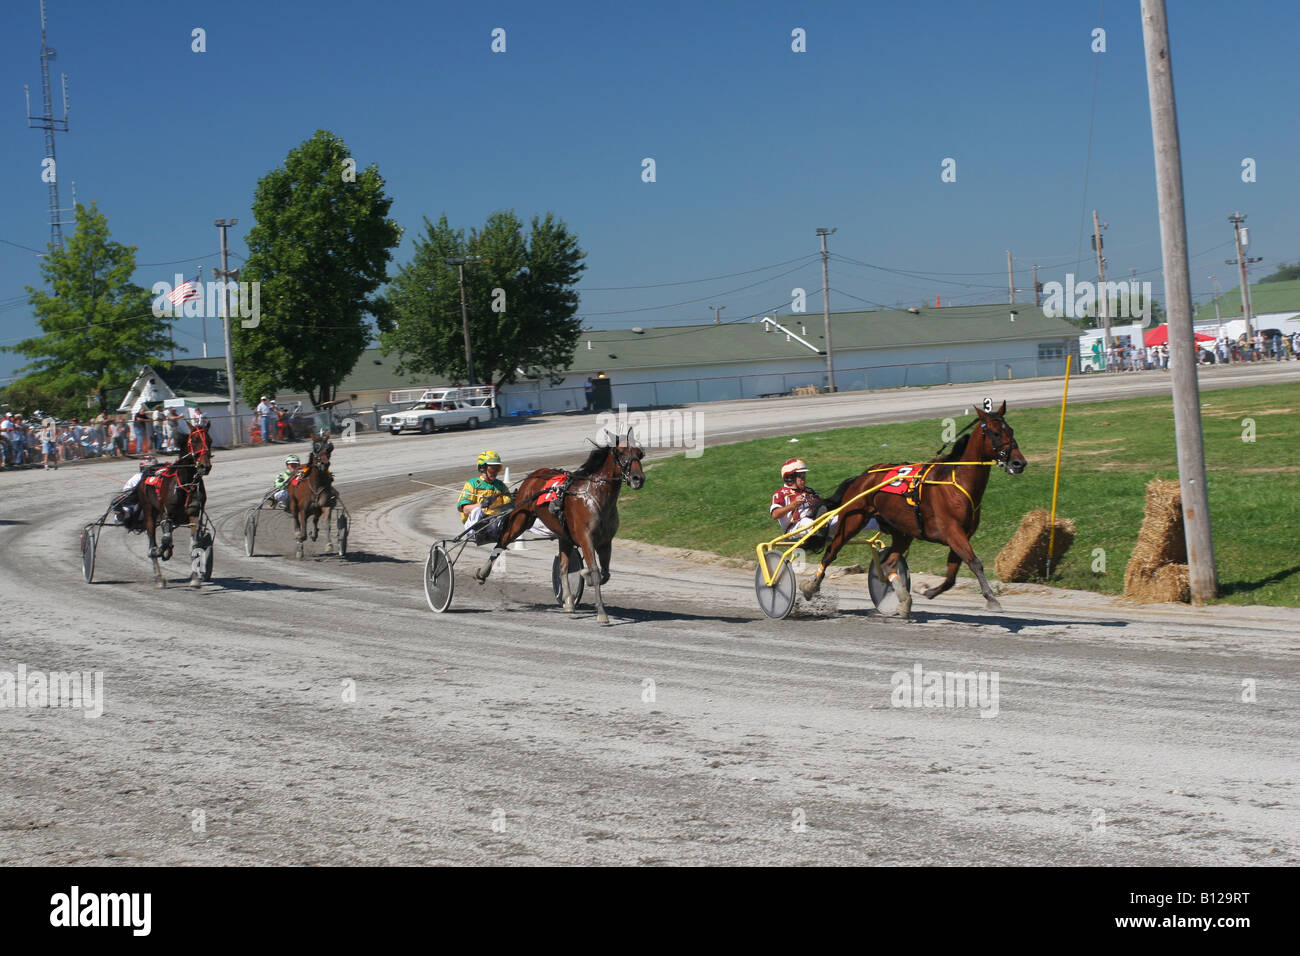 Cablaggio Racing Horse Racing Canfield Fair Canfield Ohio Mahoning County Fair Foto Stock